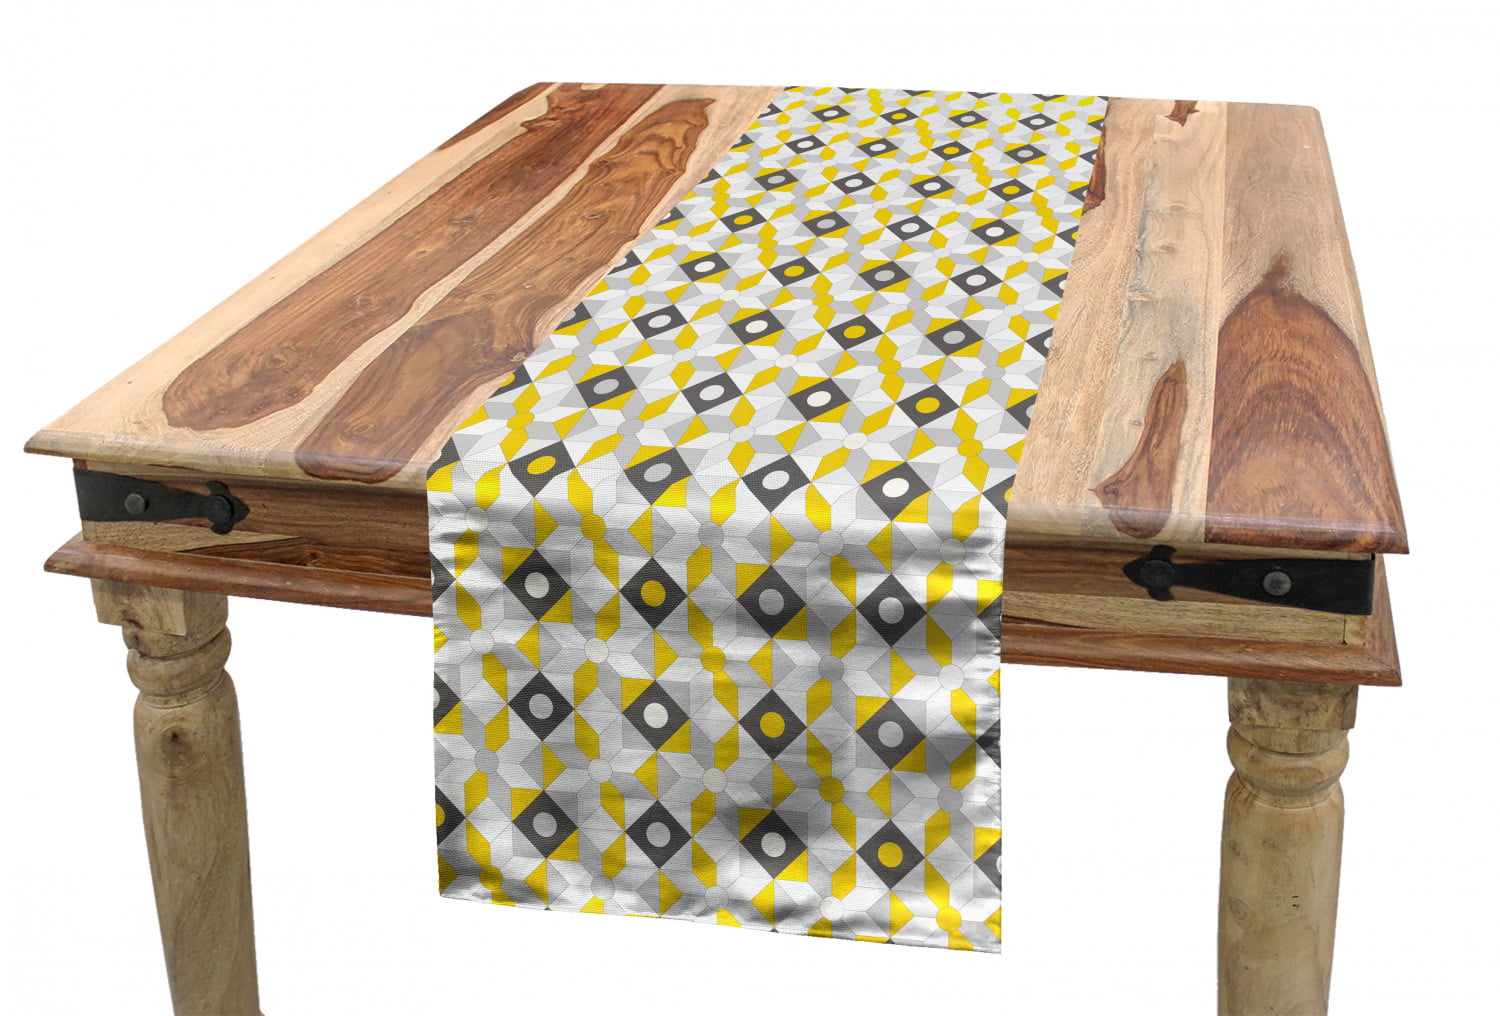 Sixties Inspired Triangles with Grunge Effect Colorful Geometric Retro Pattern Dining Room Kitchen Rectangular Runner Ambesonne Vintage Table Runner 16 X 90 Multicolor